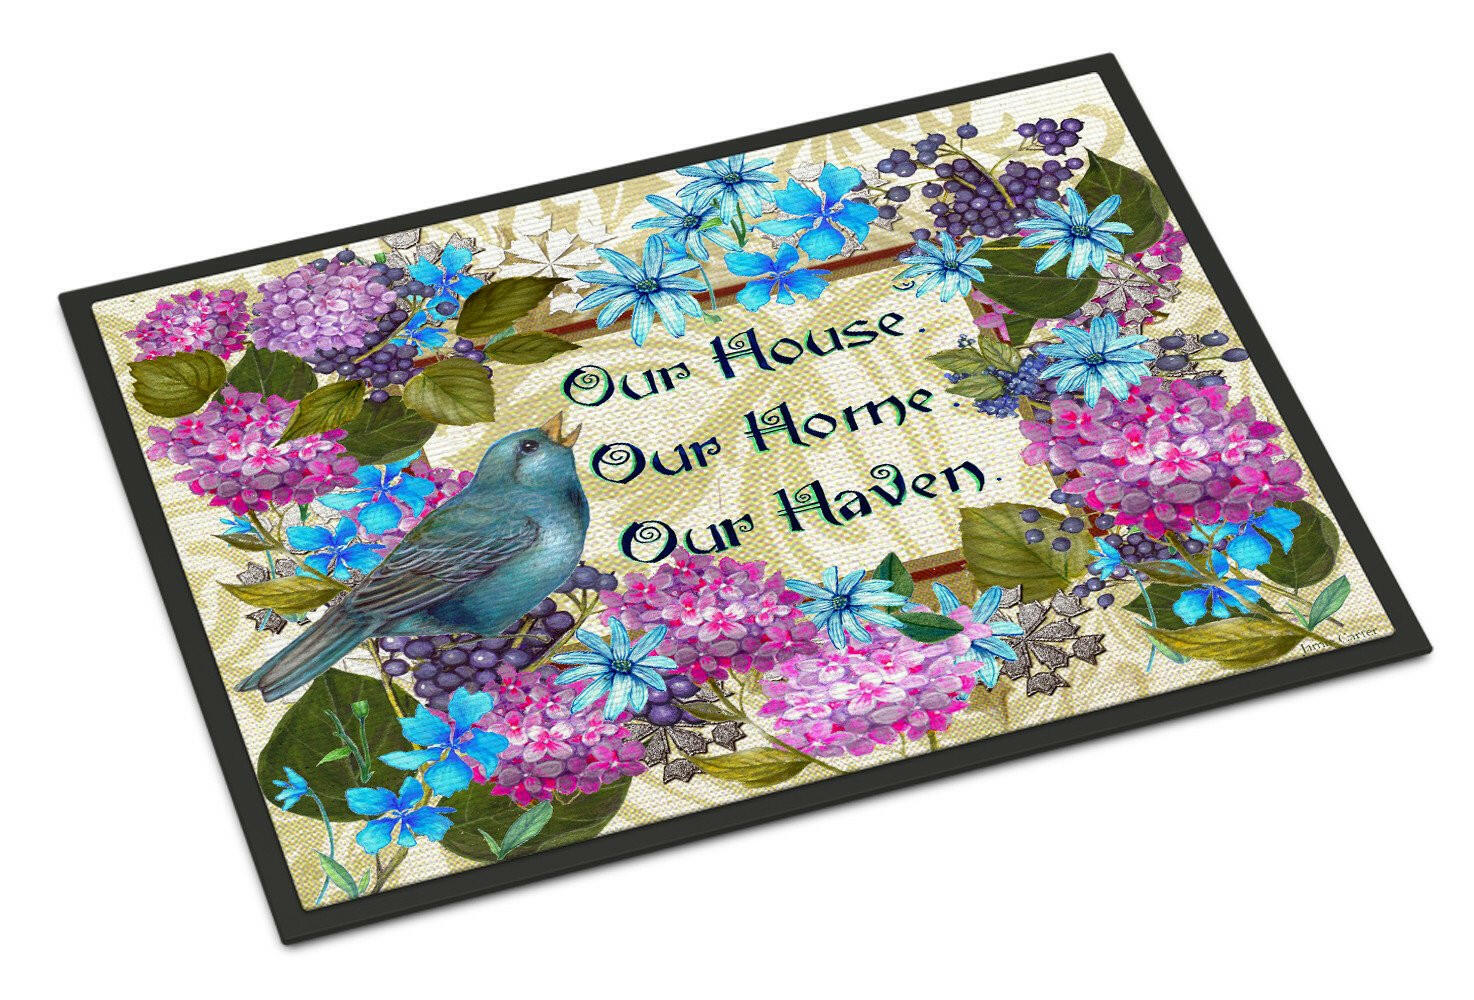 Our House Our Home Our Haven Indoor or Outdoor Mat 18x27 PJC1102MAT - the-store.com